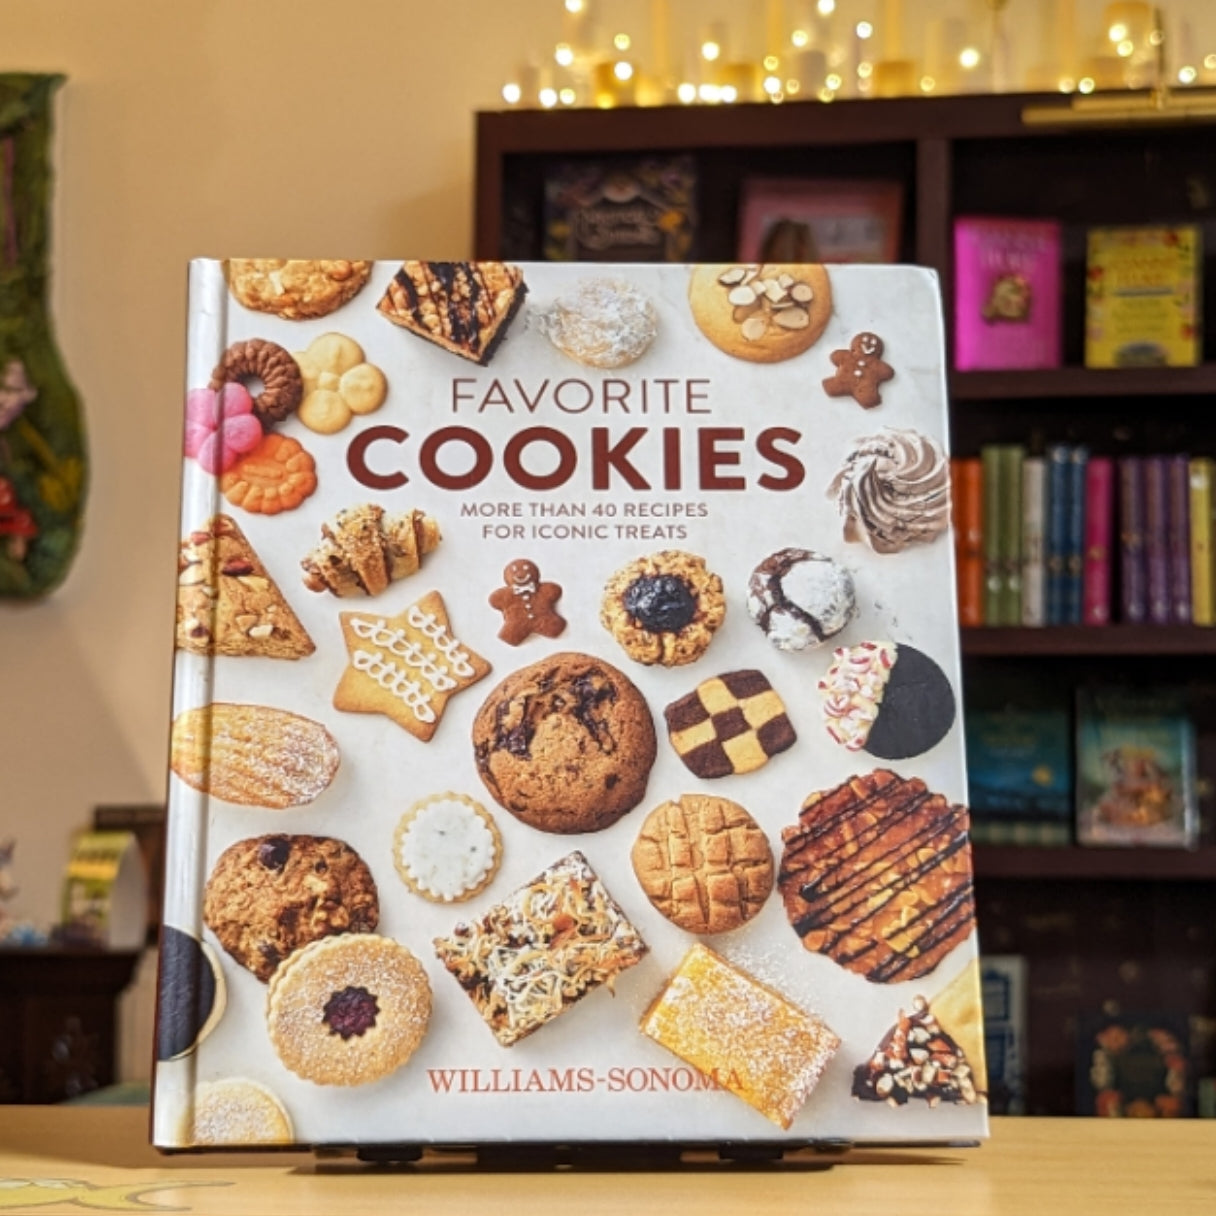 Favorite Cookies: More than 40 Recipes for Iconic Treats